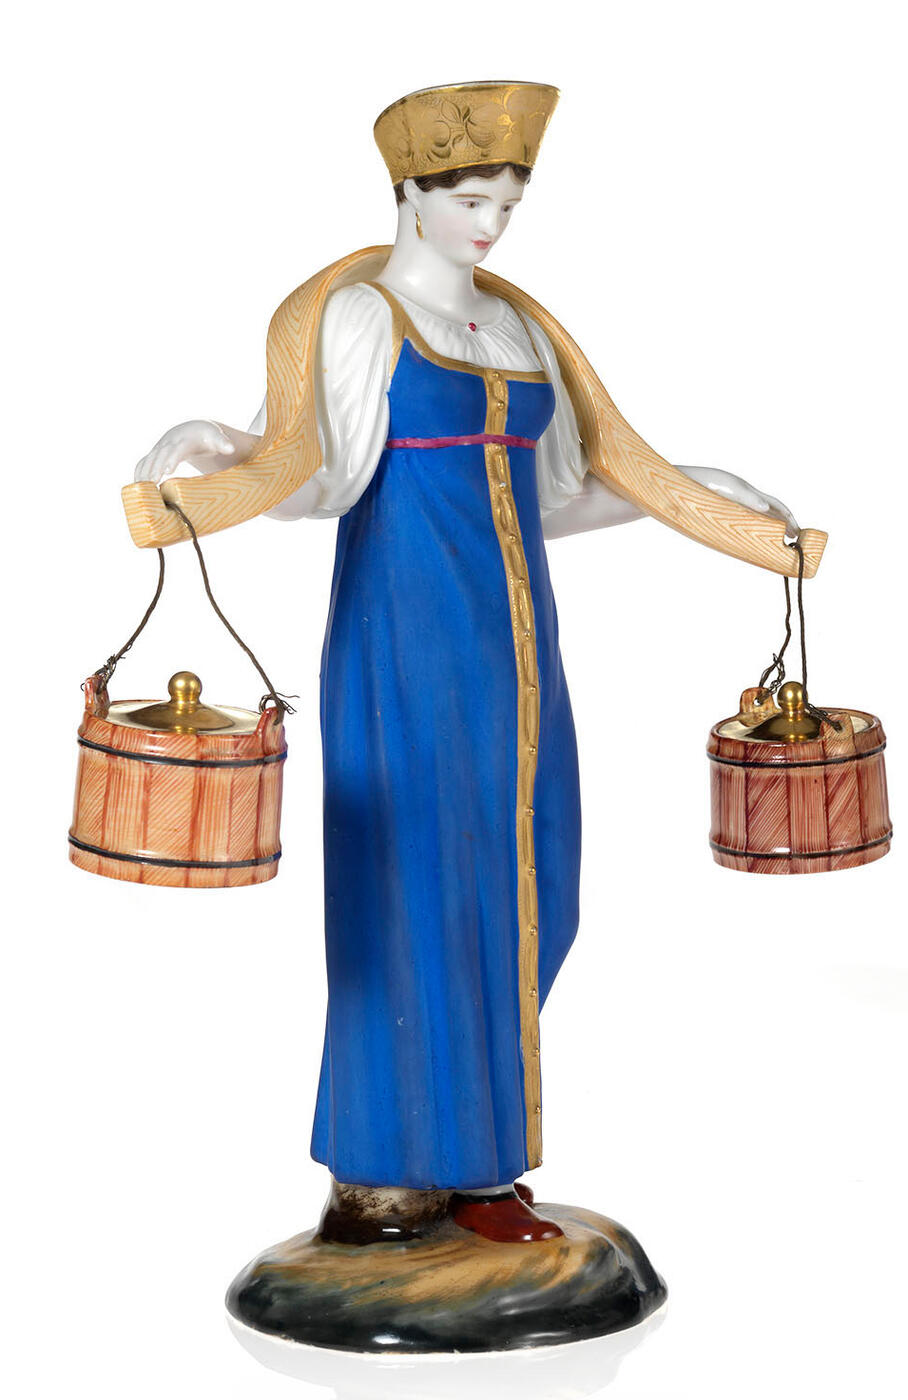 A Porcelain Figurine of a Peasant Girl Water Carrier